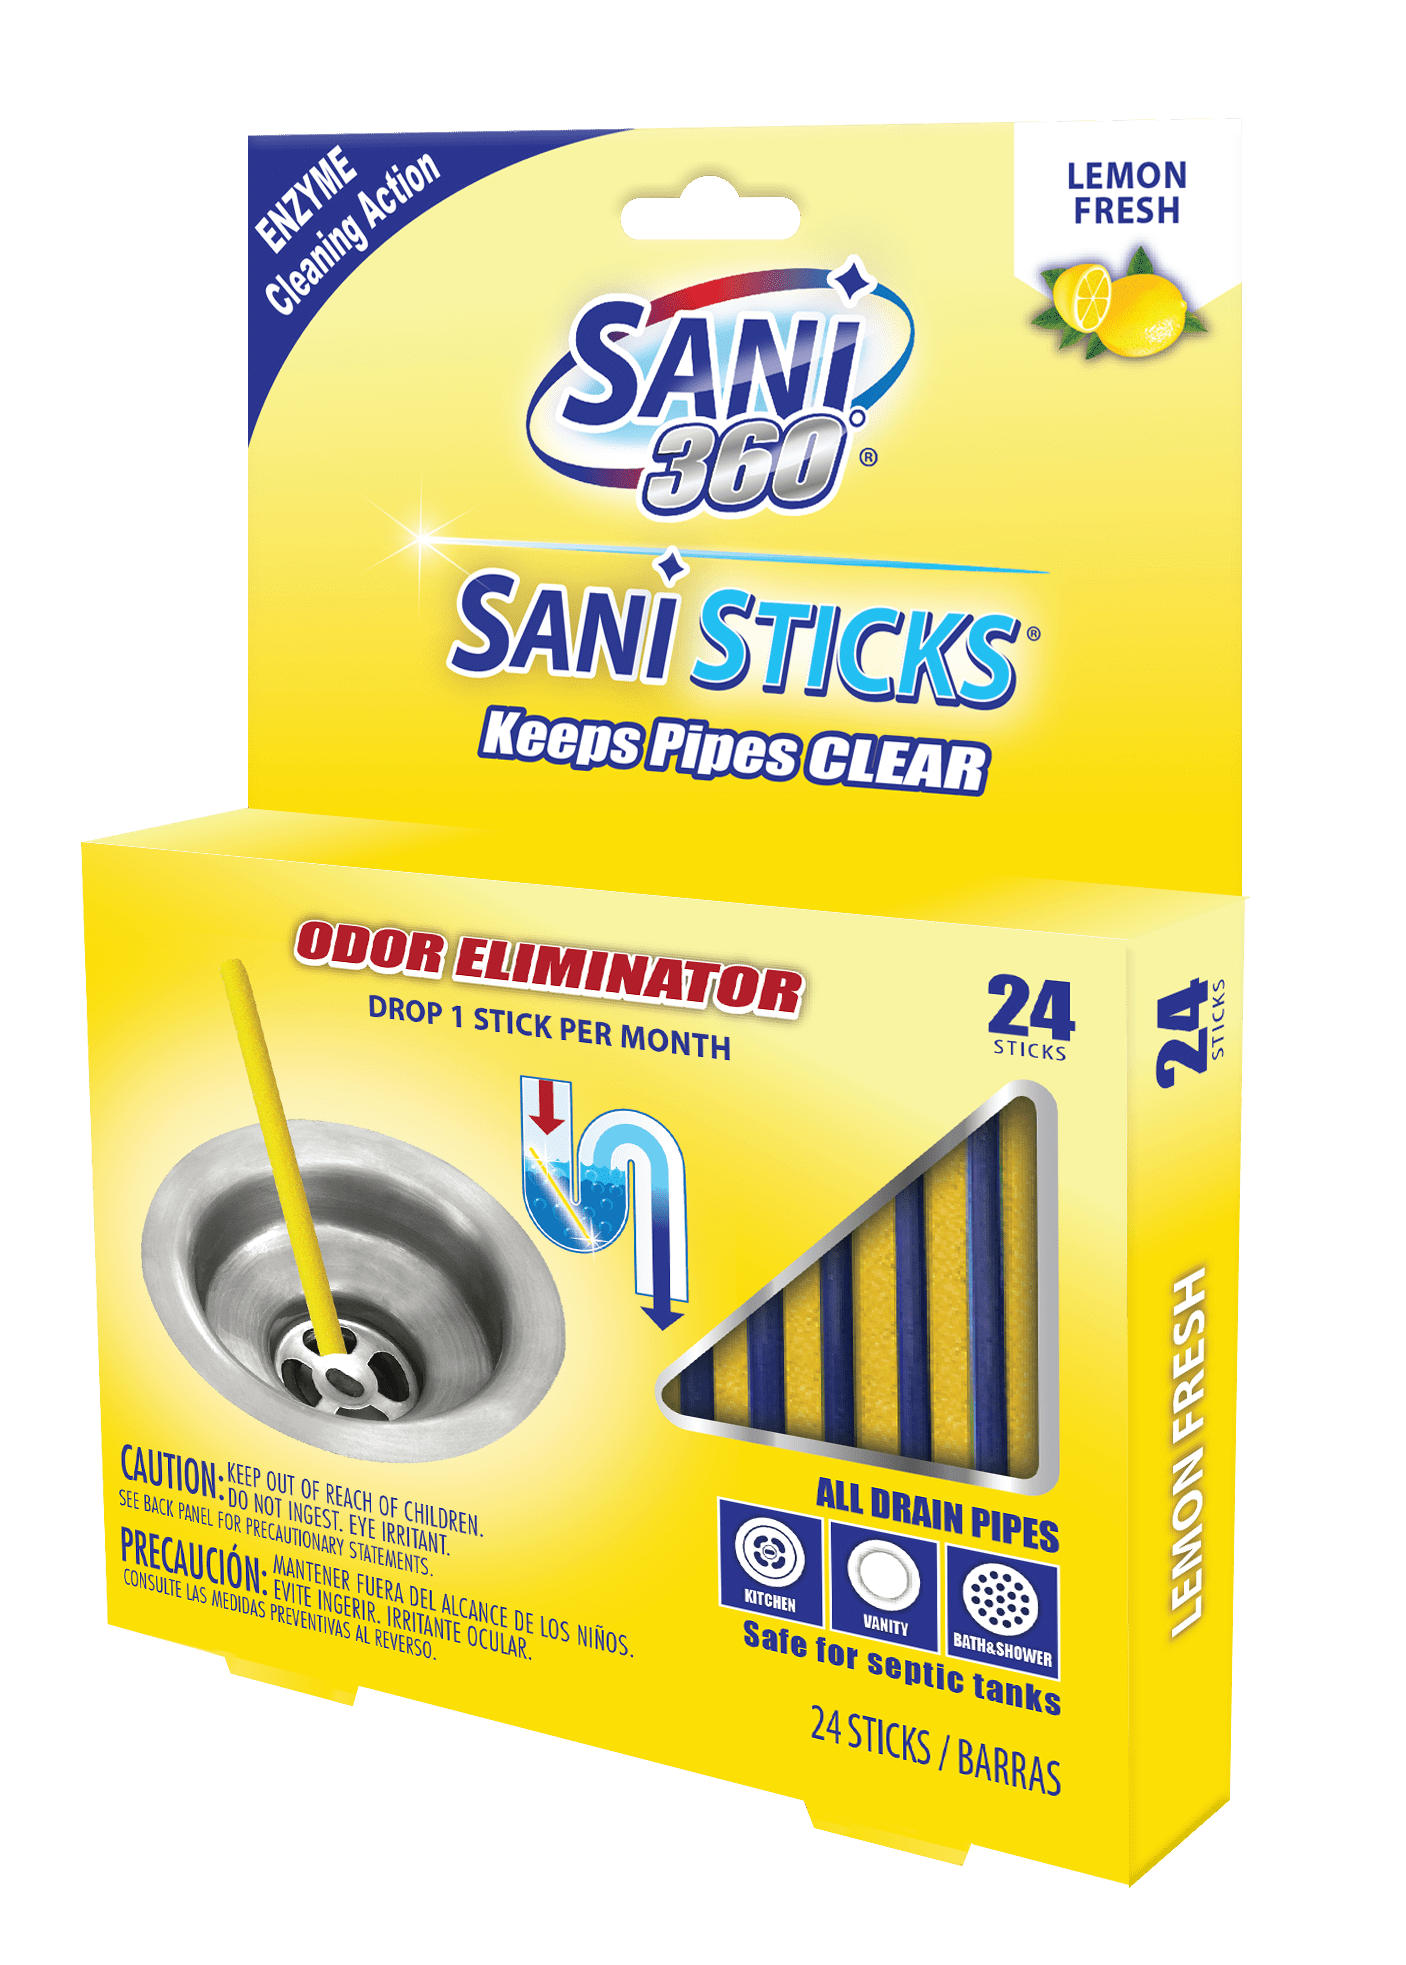 RYRA Kitchen Toilet Bathtub Drain Cleaner Spot Pipe Cleaner Sani Sticks Oil  Decontamination Clean Household Sewer Cleaning Rod